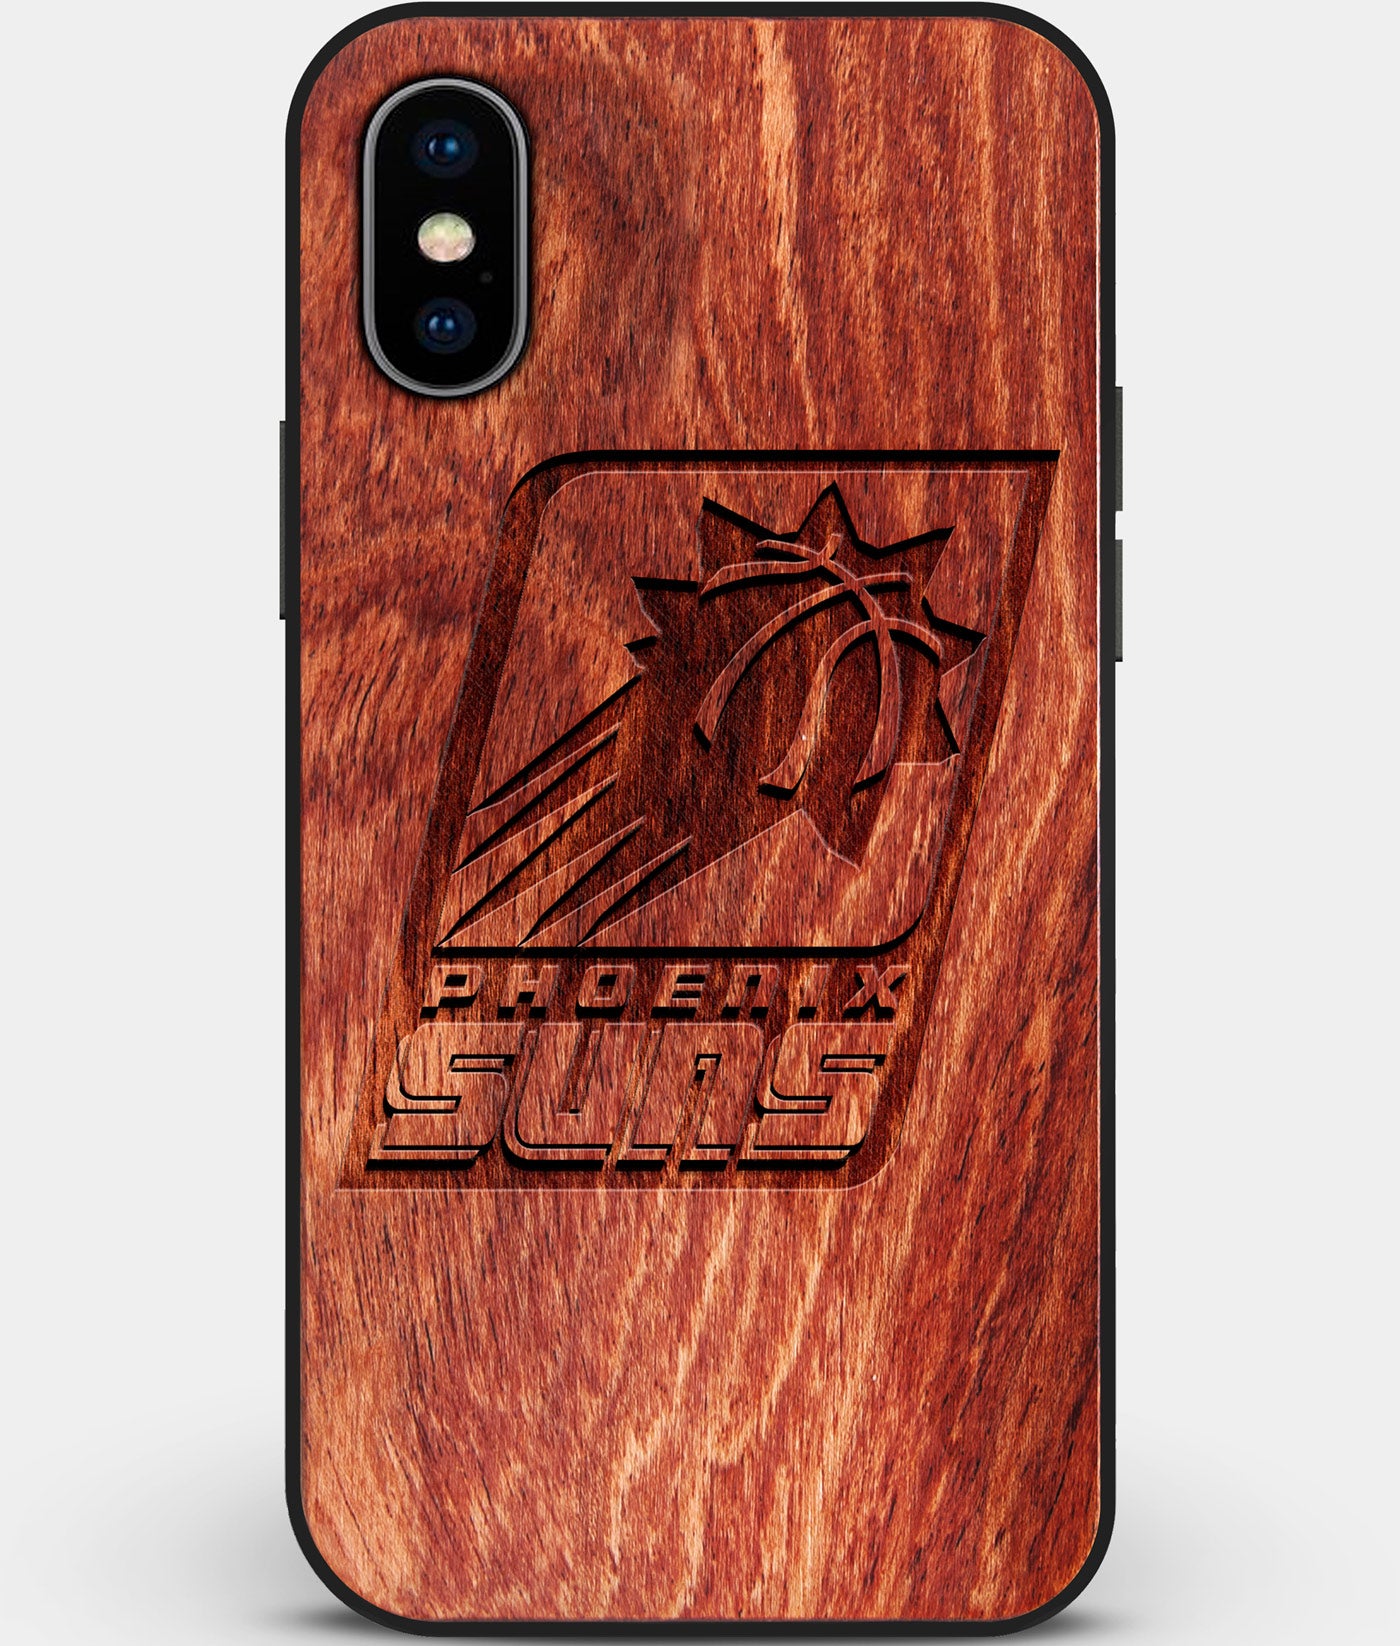 Custom Carved Wood Phoenix Suns iPhone XS Max Case | Personalized Mahogany Wood Phoenix Suns Cover, Birthday Gift, Gifts For Him, Monogrammed Gift For Fan | by Engraved In Nature